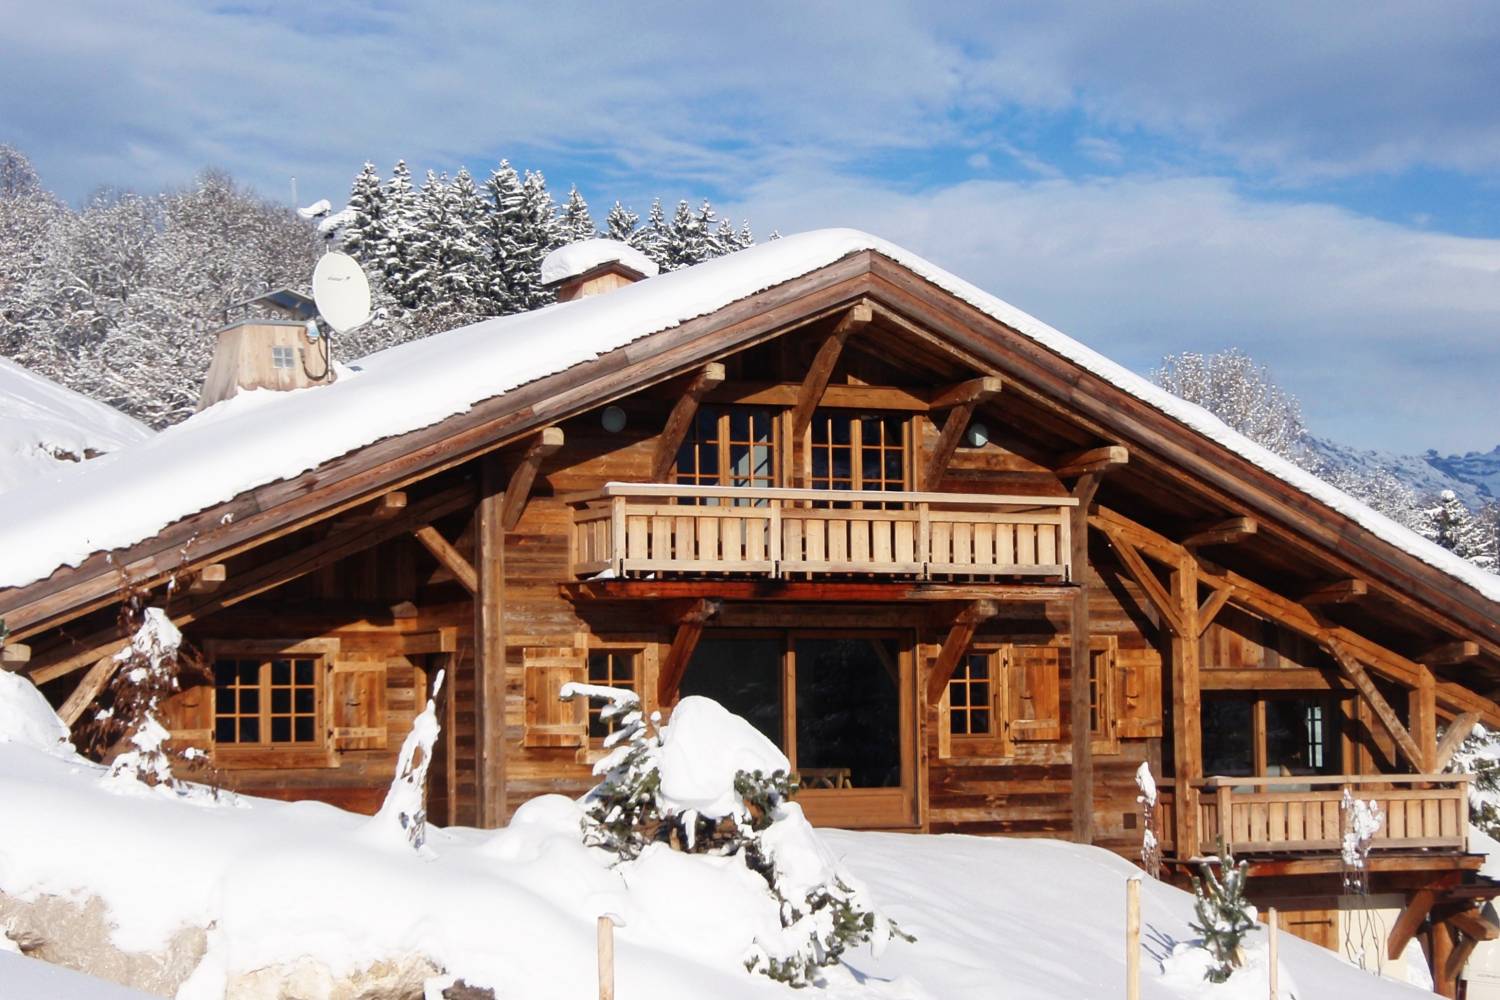 Enjoy a private chef after an amazing ski day in Megève - Take a Chef